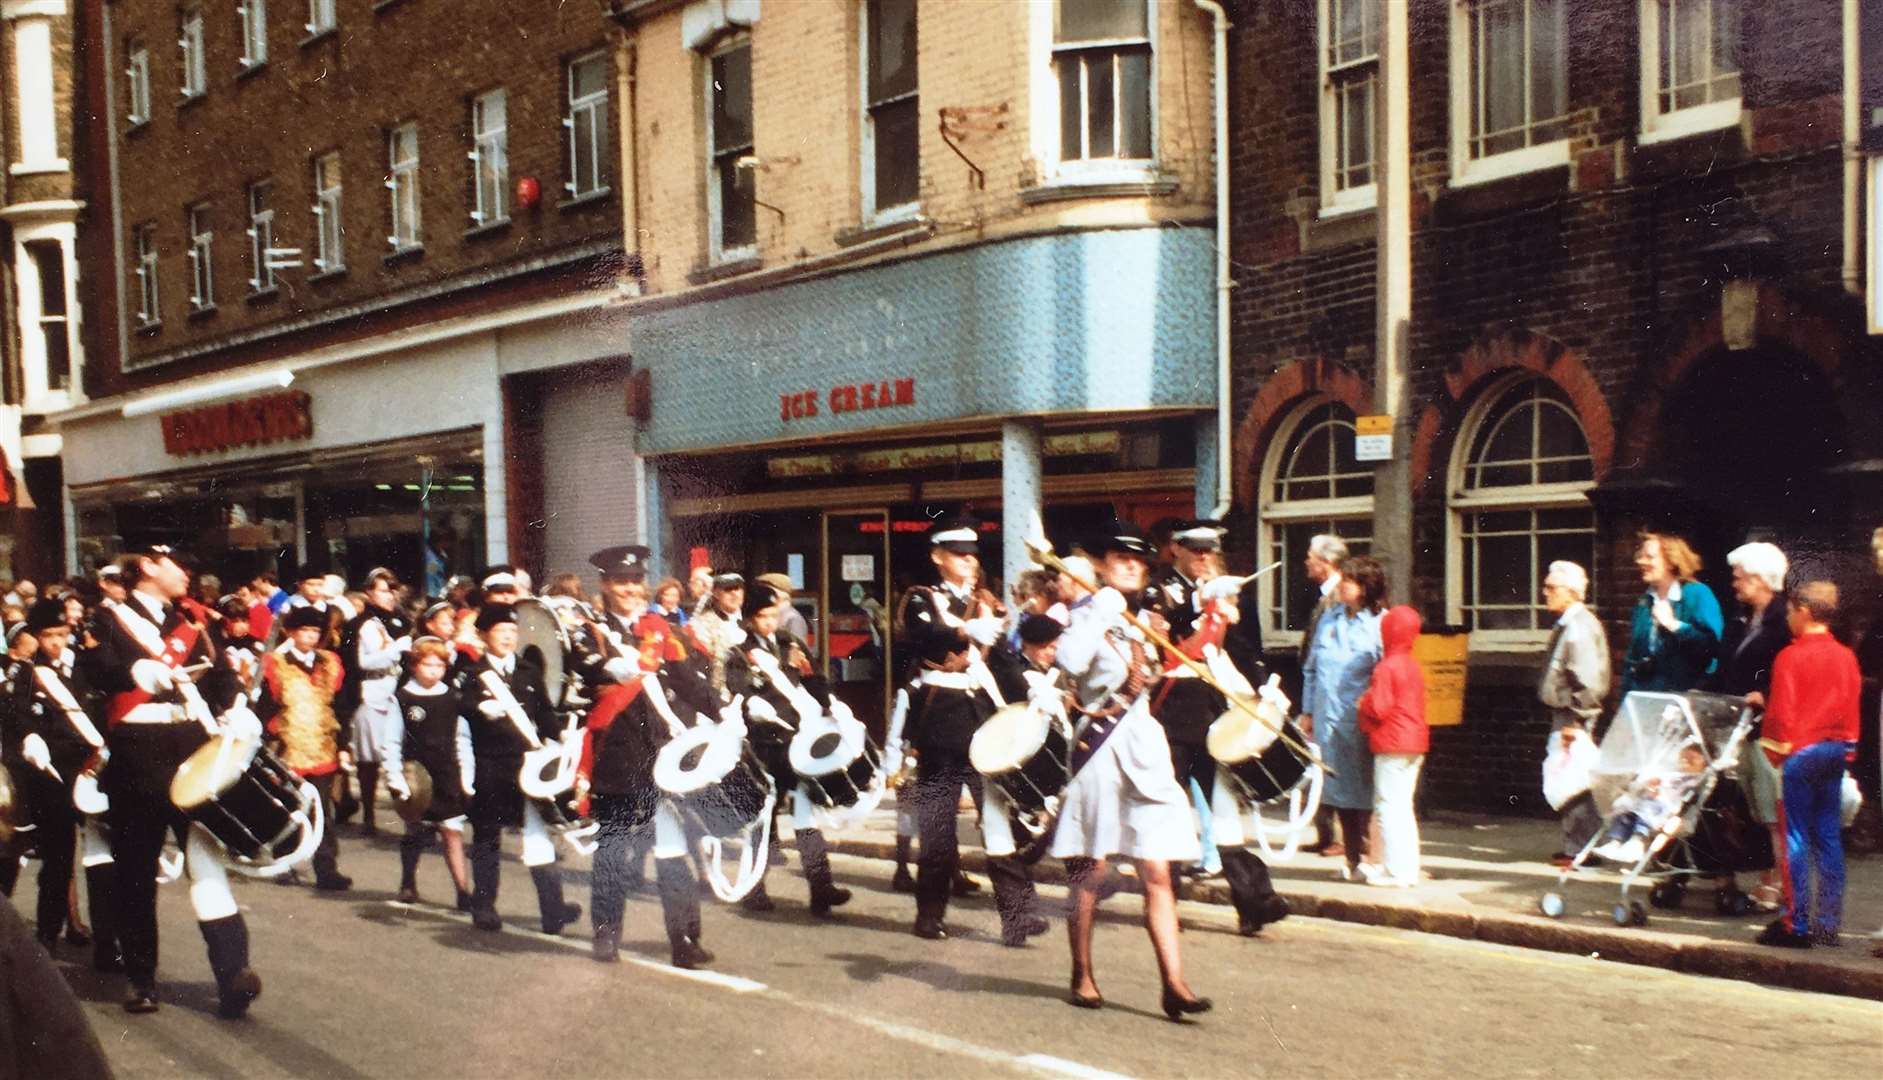 Sheppey St John Ambulance Band takes part in the 1987 Sheppey carnival through Sheerness High Street